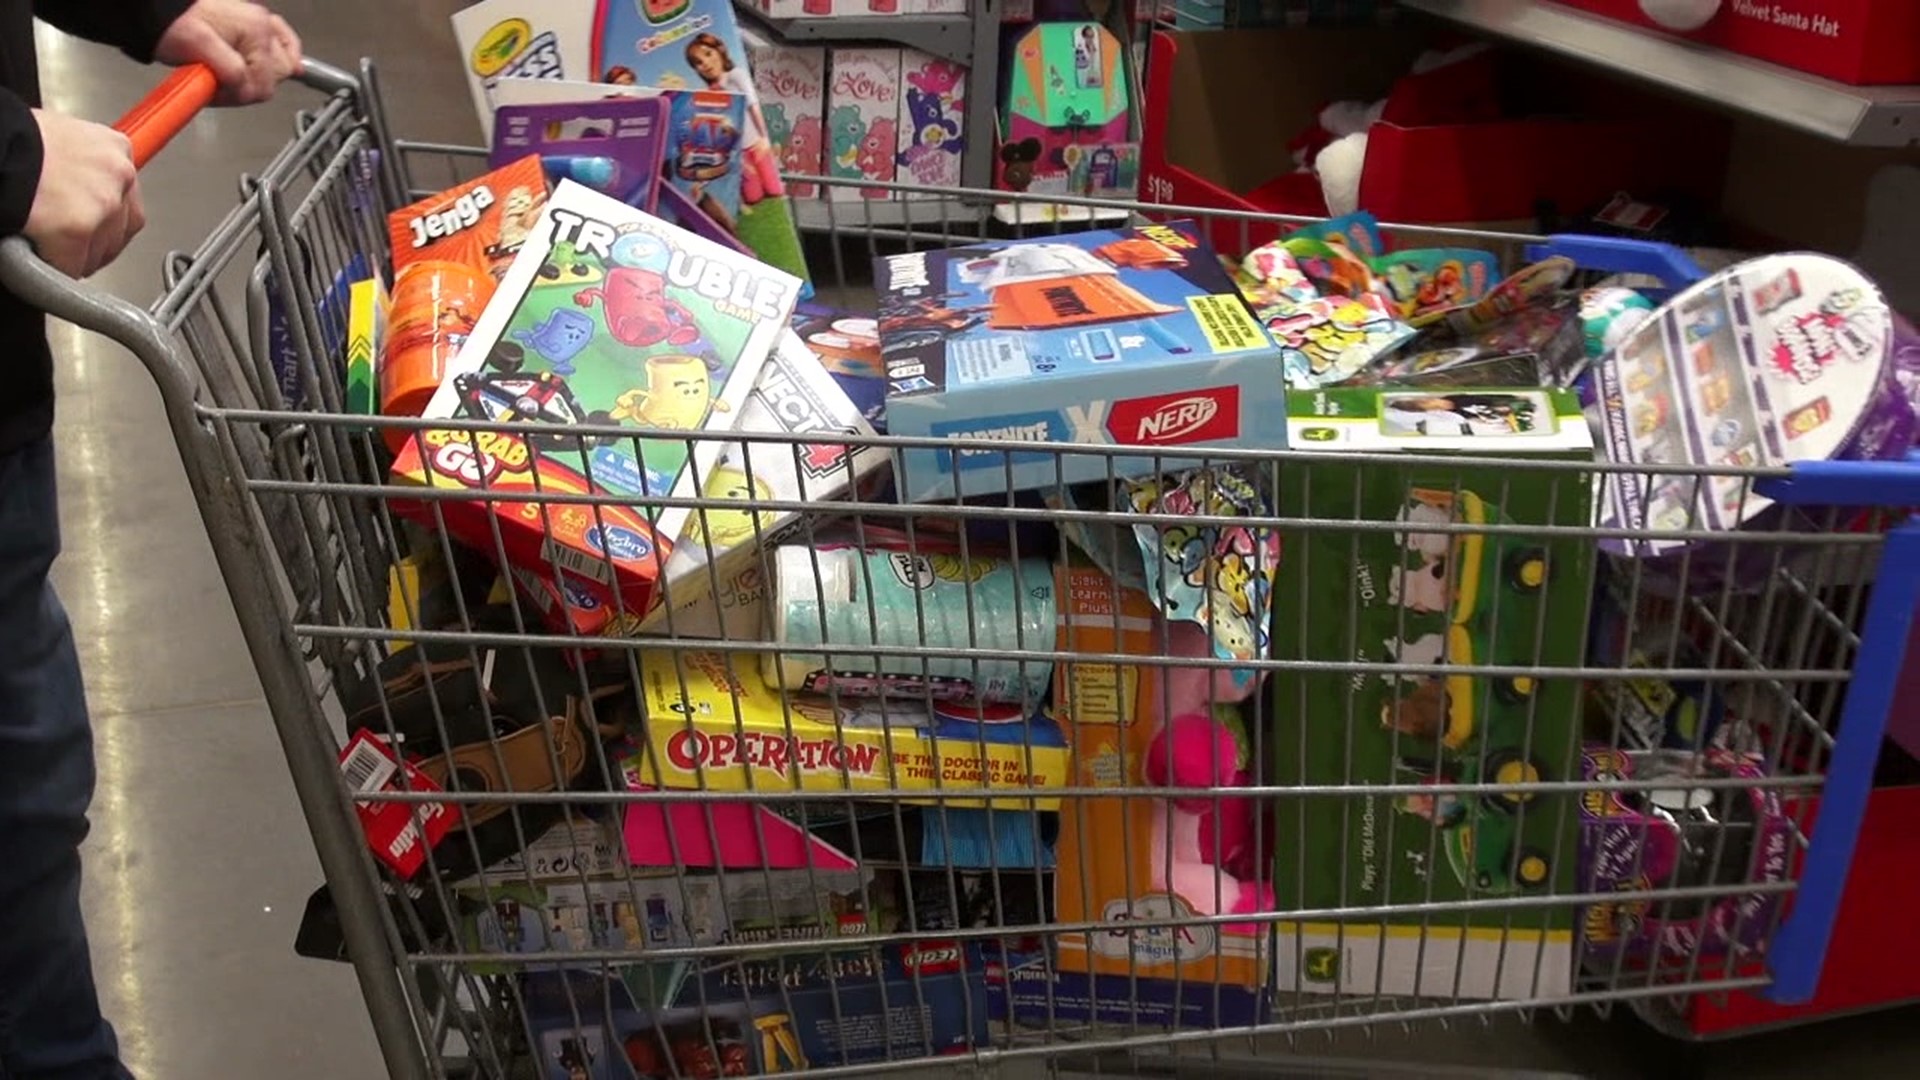 Folks in Wyoming County spent the morning shopping to help families in need with Christmas gifts for kids.